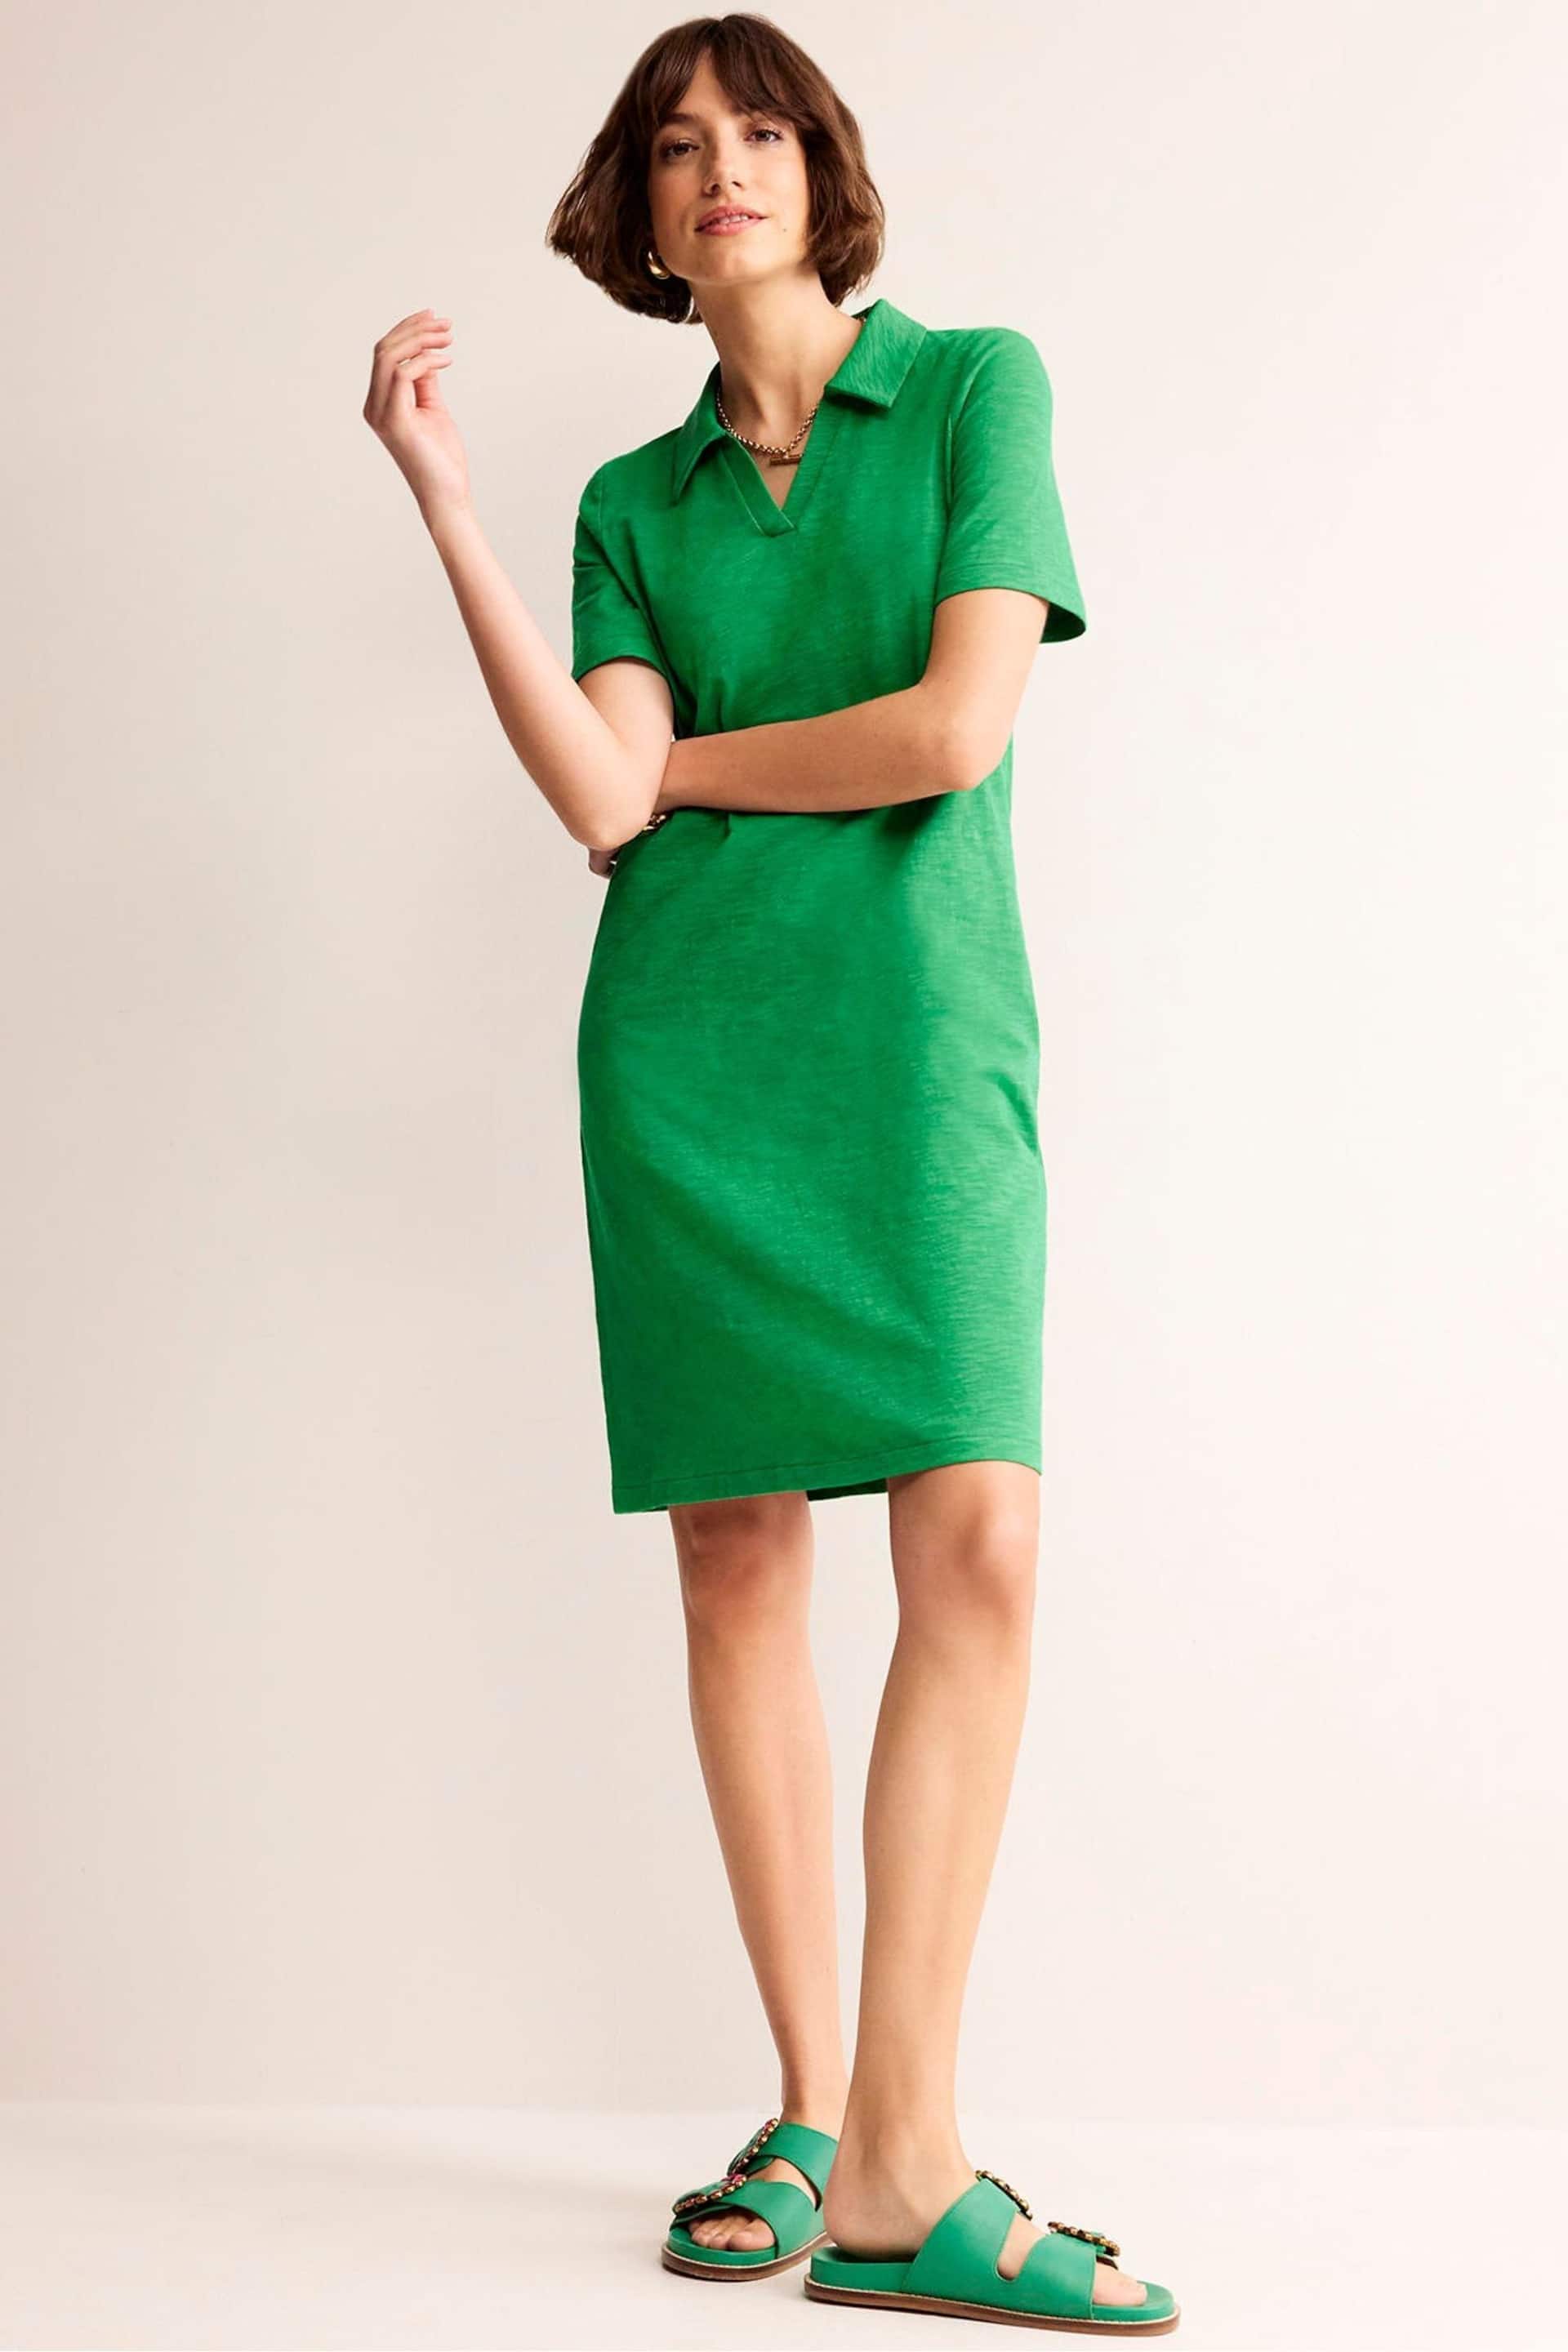 Boden Green Ingrid Polo Cotton Dress - Image 2 of 5